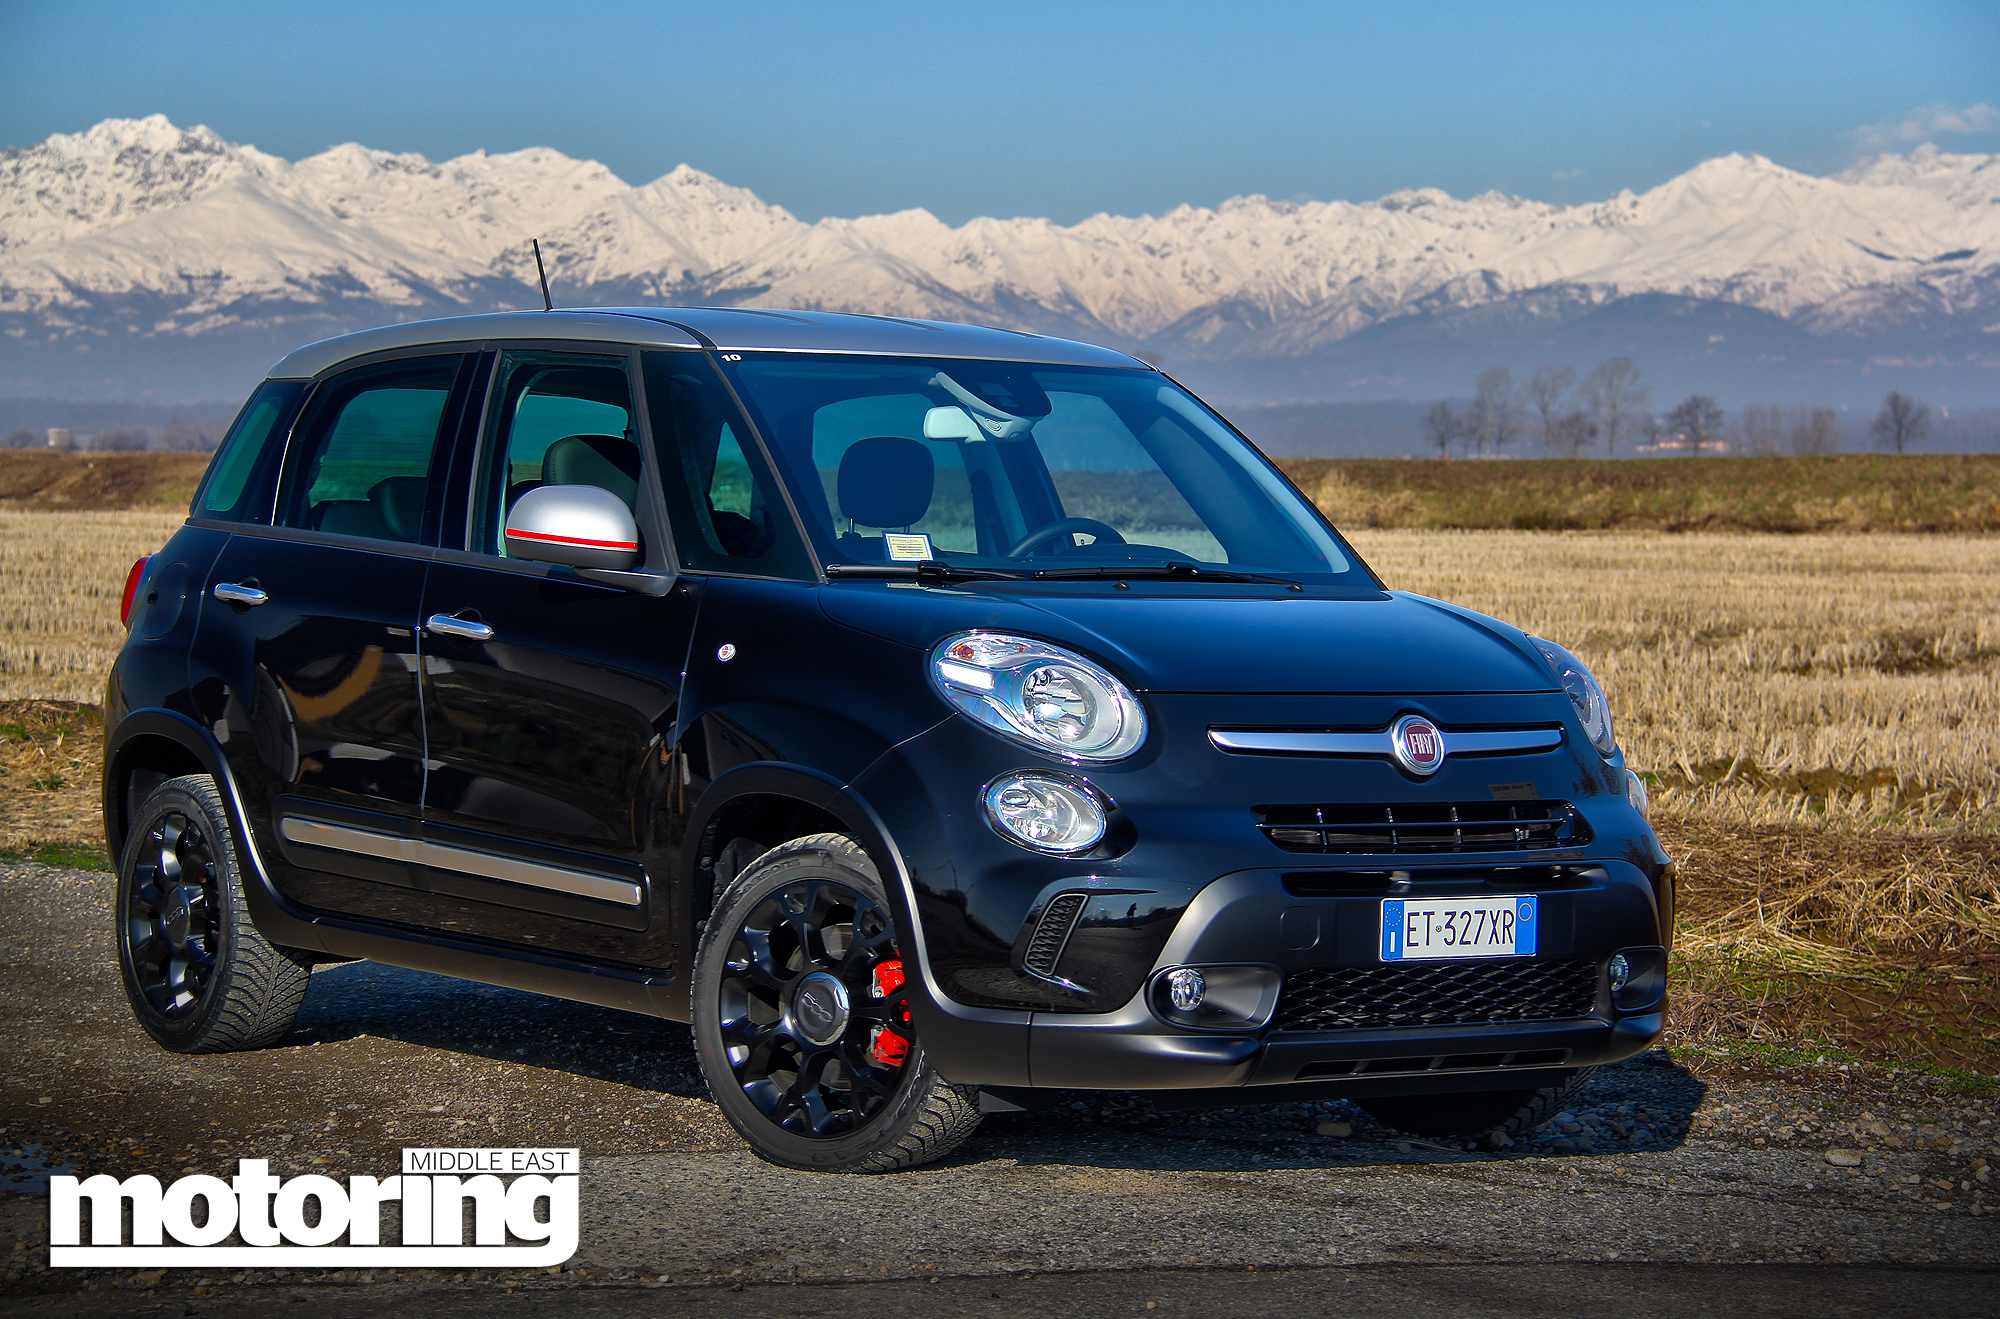 2014 Fiat 500l Trekking Middle East Launch Spec And Price